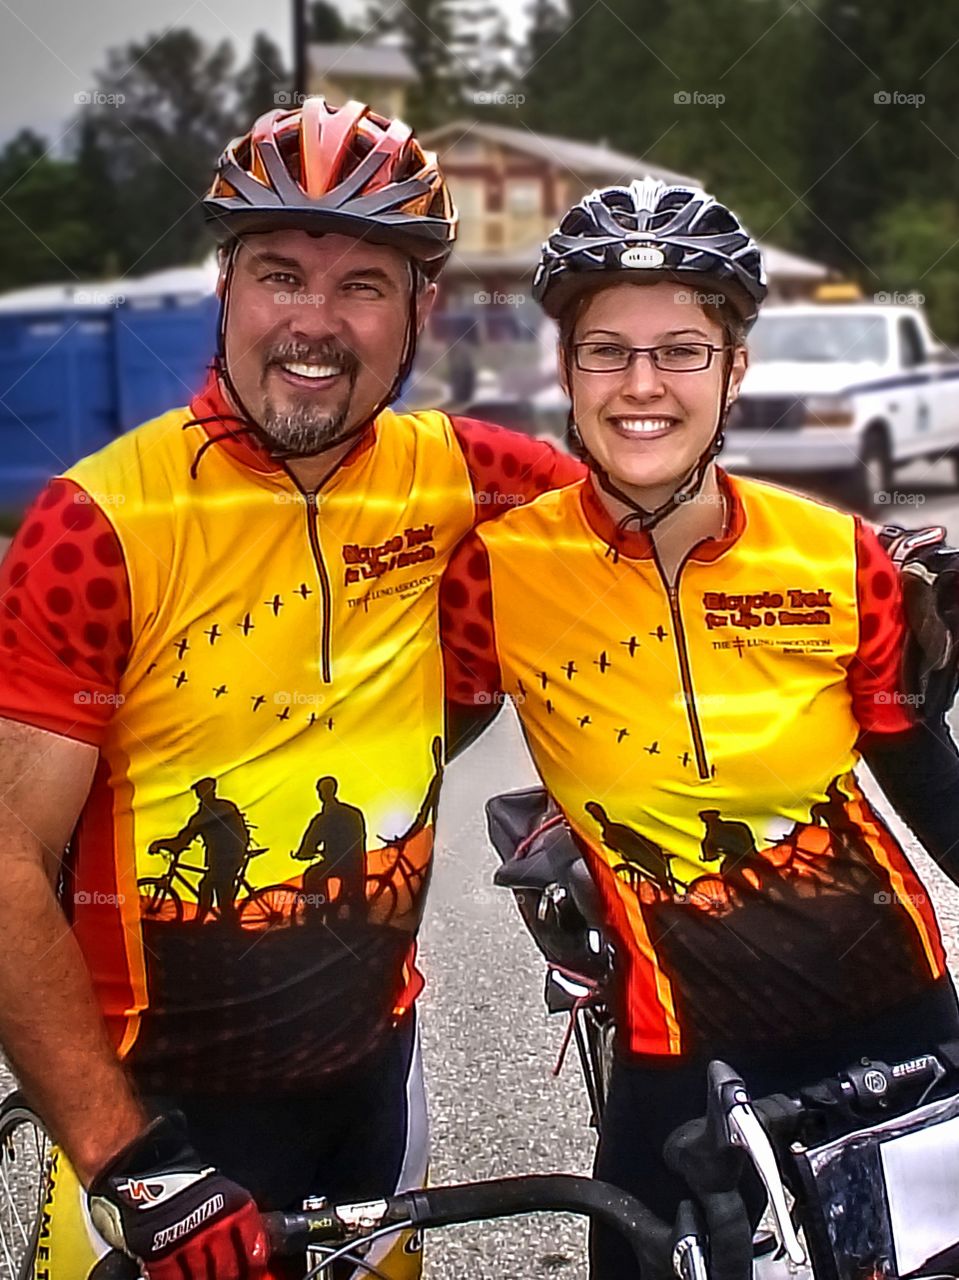 Proud Father. Starting the first leg of my daughter's 71 day, 7000 km ride across Canada raising money for the Lung Foundation and "Biking for Breath".